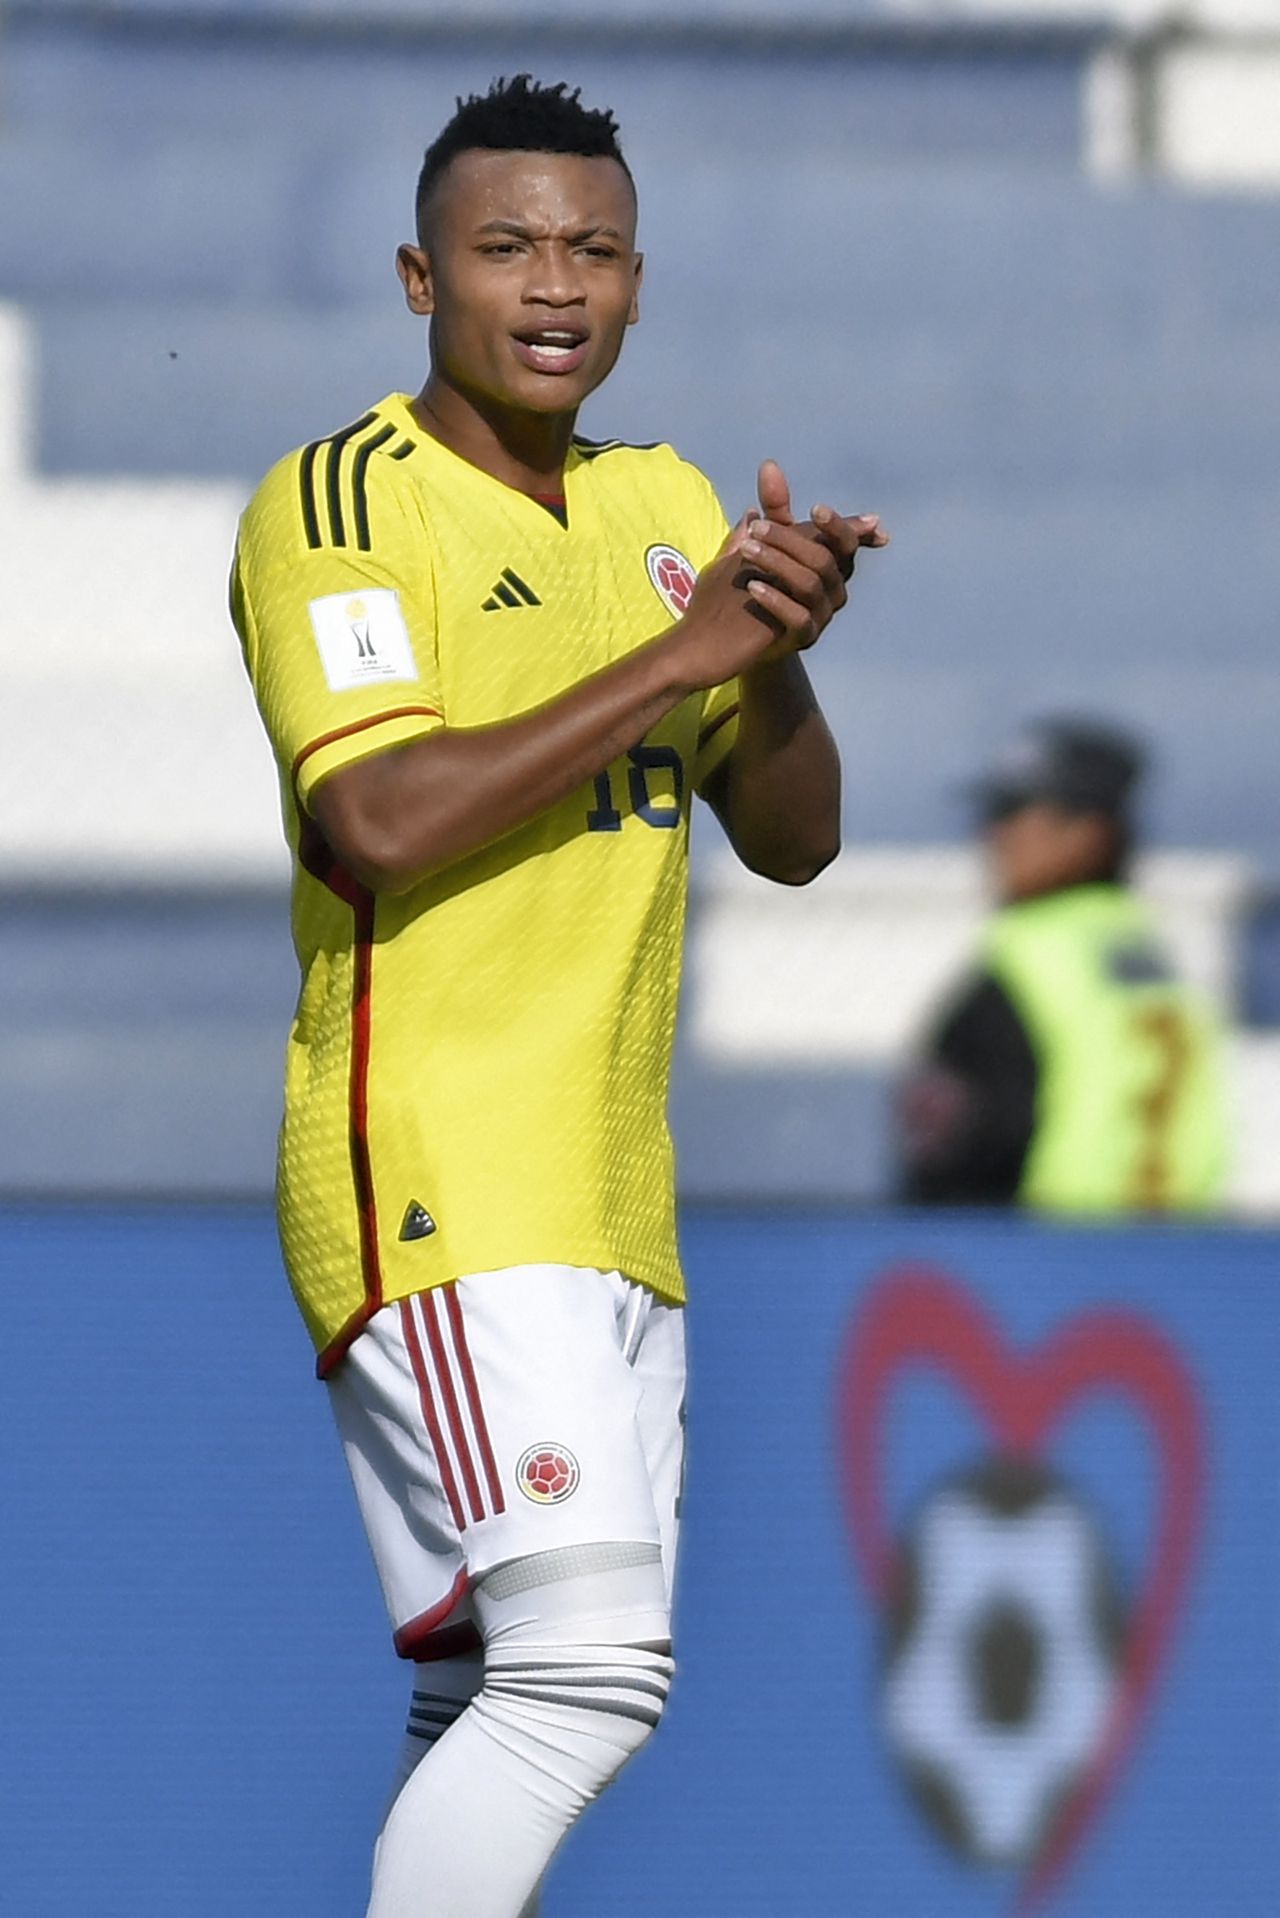 Colombia's midfielder Oscar Cortes celebrates after scoring a goal during the Argentina 2023 U-20 World Cup round of 16 football match between Colombia and Slovakia at the San Juan del Bicentenario stadium in San Juan, Argentina, on May 31, 2023. (Photo by Andres Larrovere / AFP)